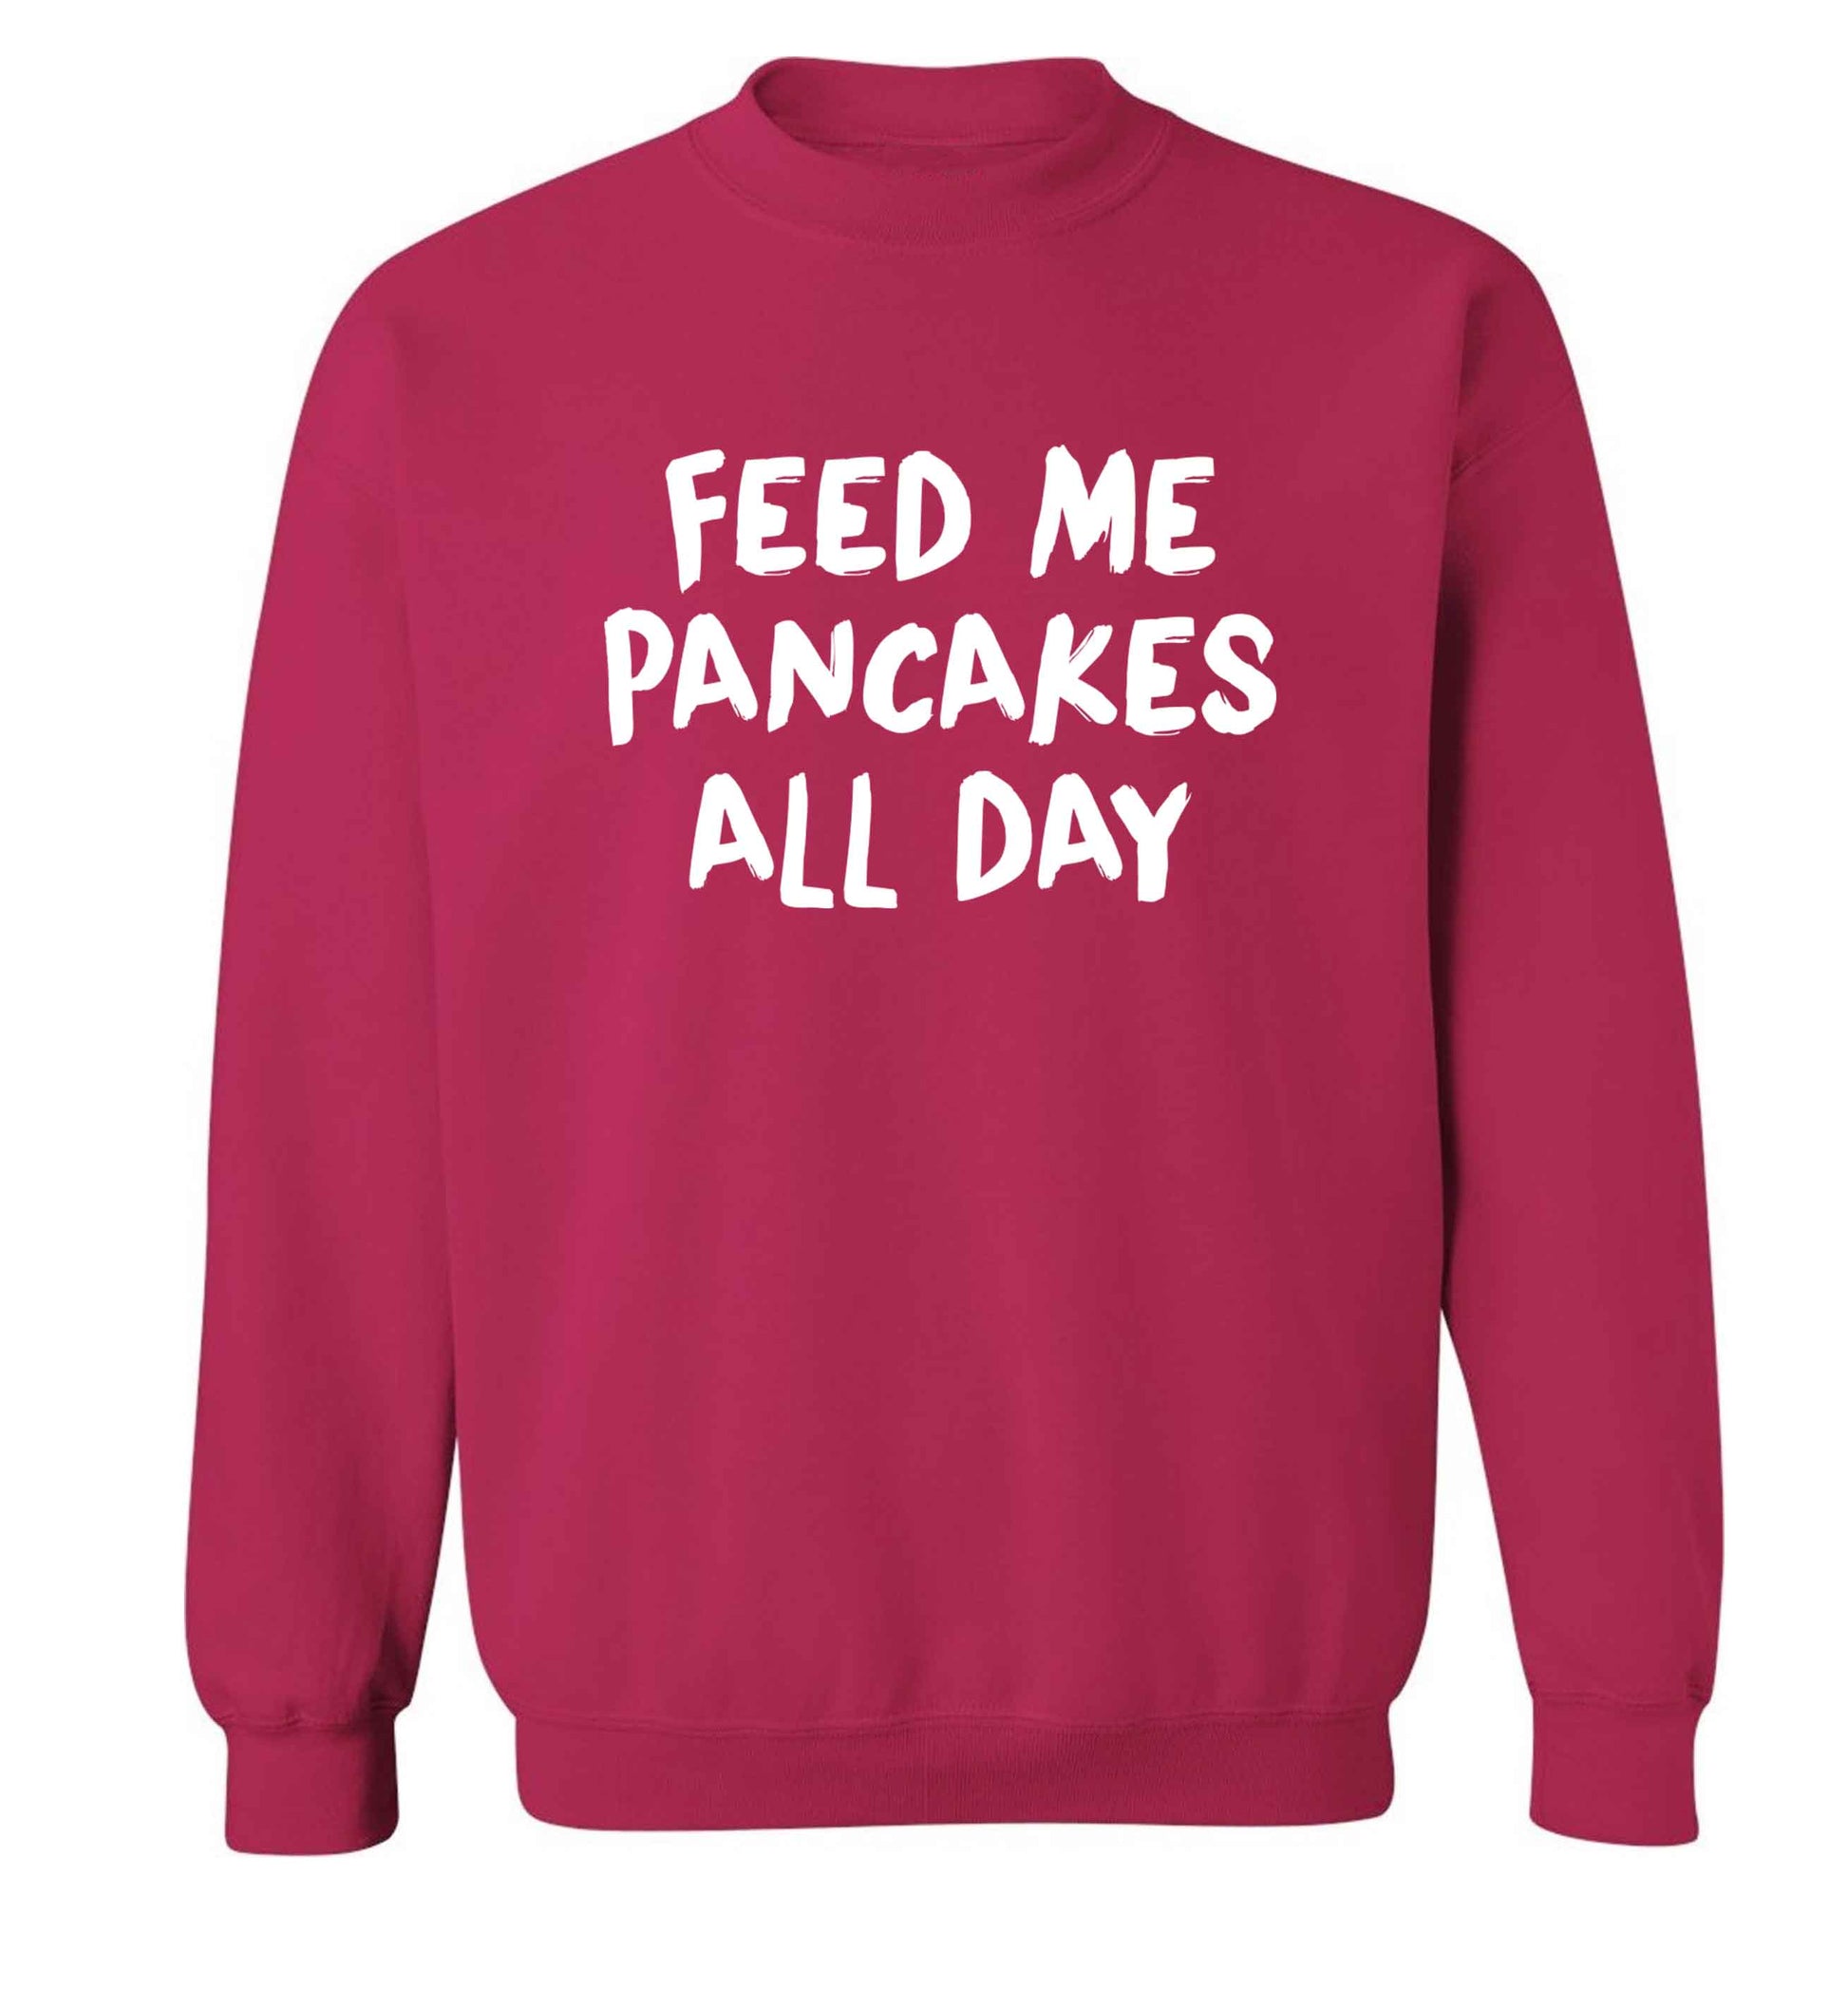 Feed me pancakes all day adult's unisex pink sweater 2XL